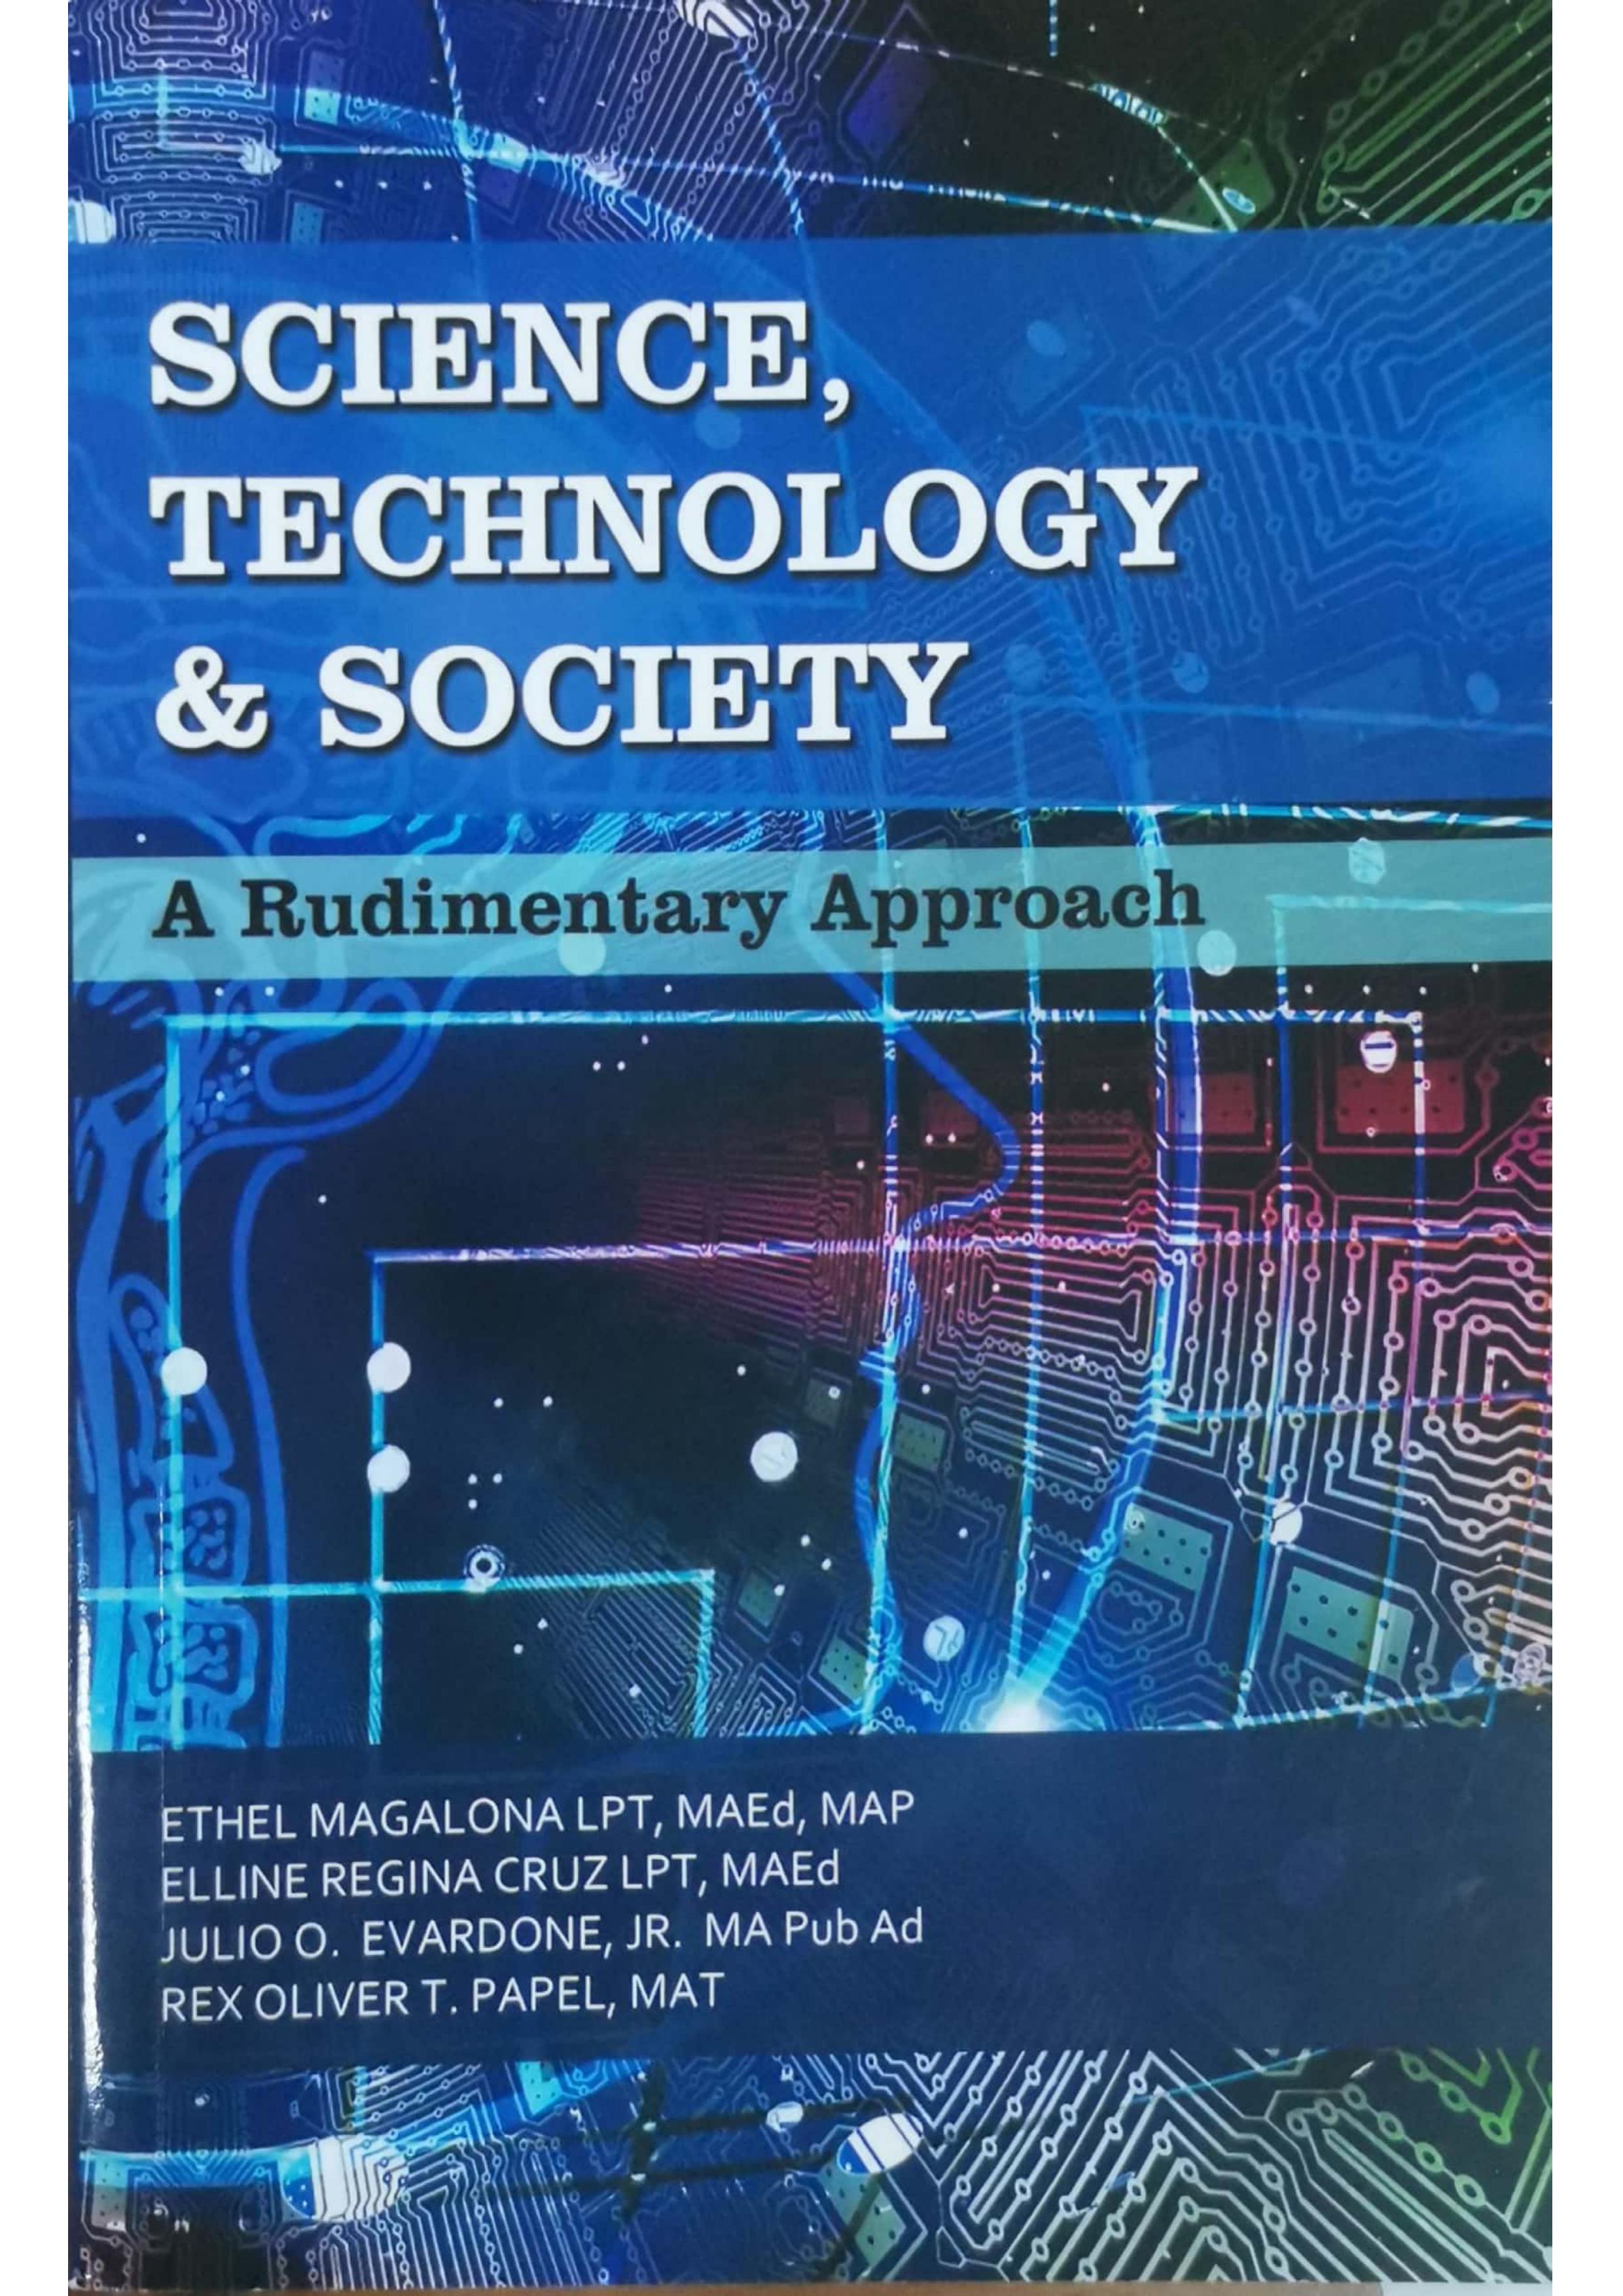 research paper about science technology and society